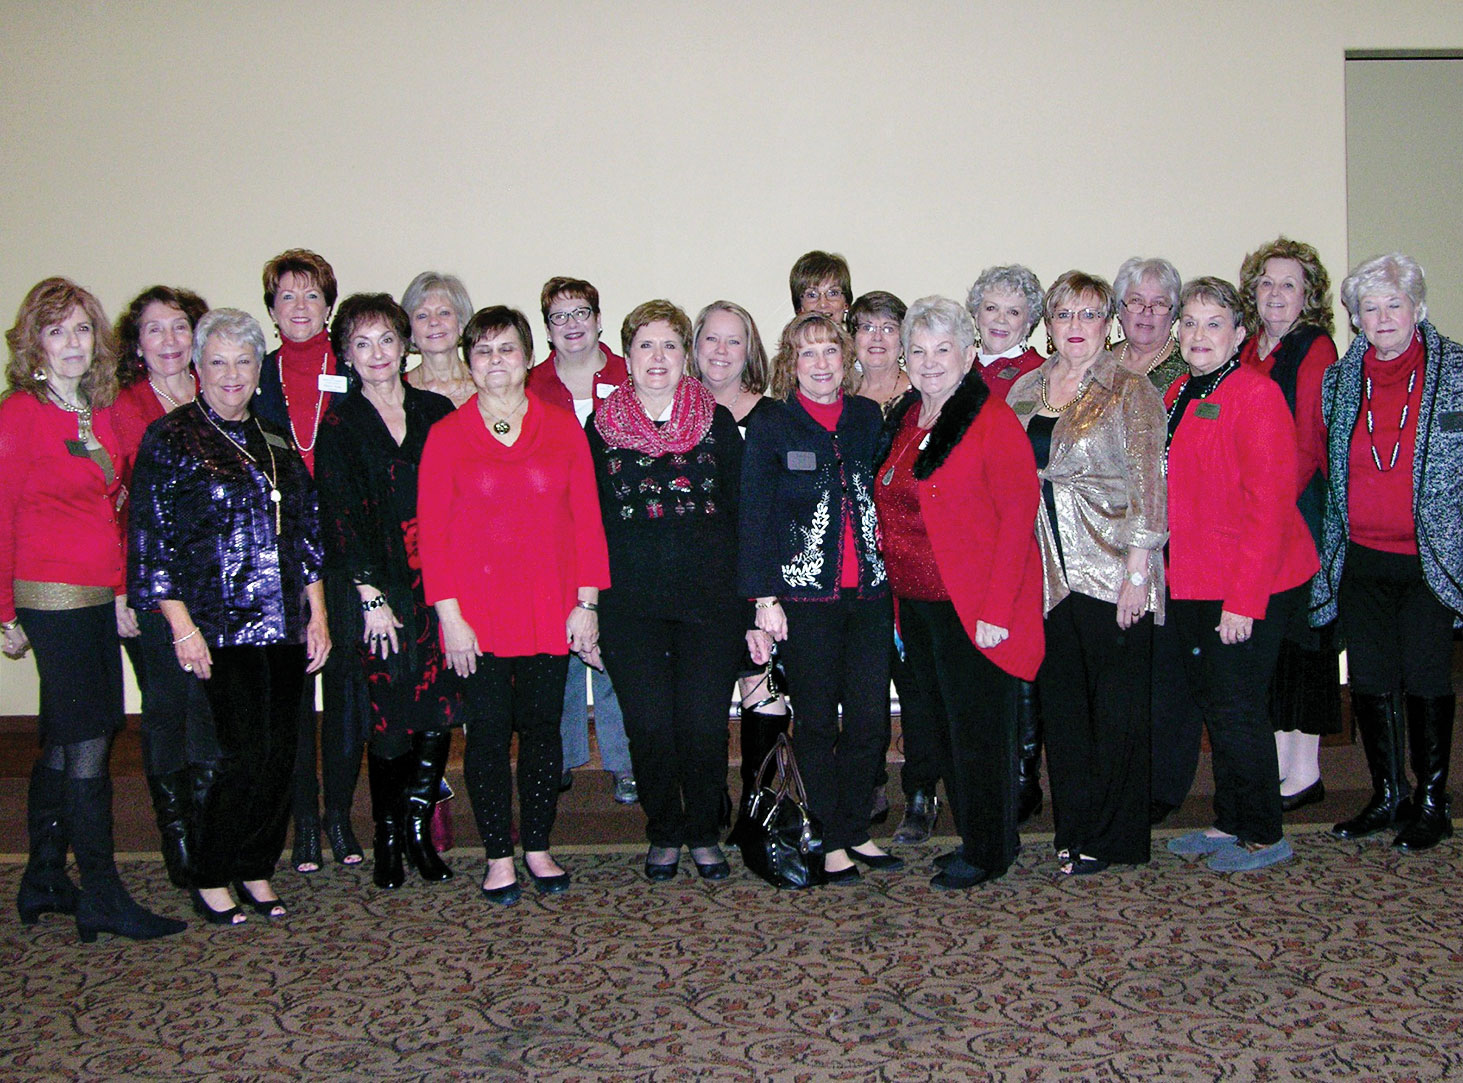 The 2017 Robson Ranch Women’s Club Executive Board and Committee Chairs, left to right, front row: Darla Mahan, past president; Peggy Crandell, special projects; Peggy Backes, secretary; BJ Watson, welcome; Laurie Wiginton, ways and means Co-Chair; Bert Zeitlin, website; Jan Utzman, community relations; Sharon Foy, 2017 president; Ruby Wilson, Hospitality; Joyce Ambre, vice president, Membership; Joan Krause, Luncheon Coordinator; back row: Joyce Frey, Programs; Judy Ondina, Service; Mary Ann Carroll, sunshine; Consie Javor, parliamentarian; Gayle Coe, publicity; Bobbi Hardt, ways and means co-chair; Carol Cooley, treasurer; Connie Wells, programs assistant; Mary Ornberg, 2018 president elect. Vicki Baker, historian, is not shown.